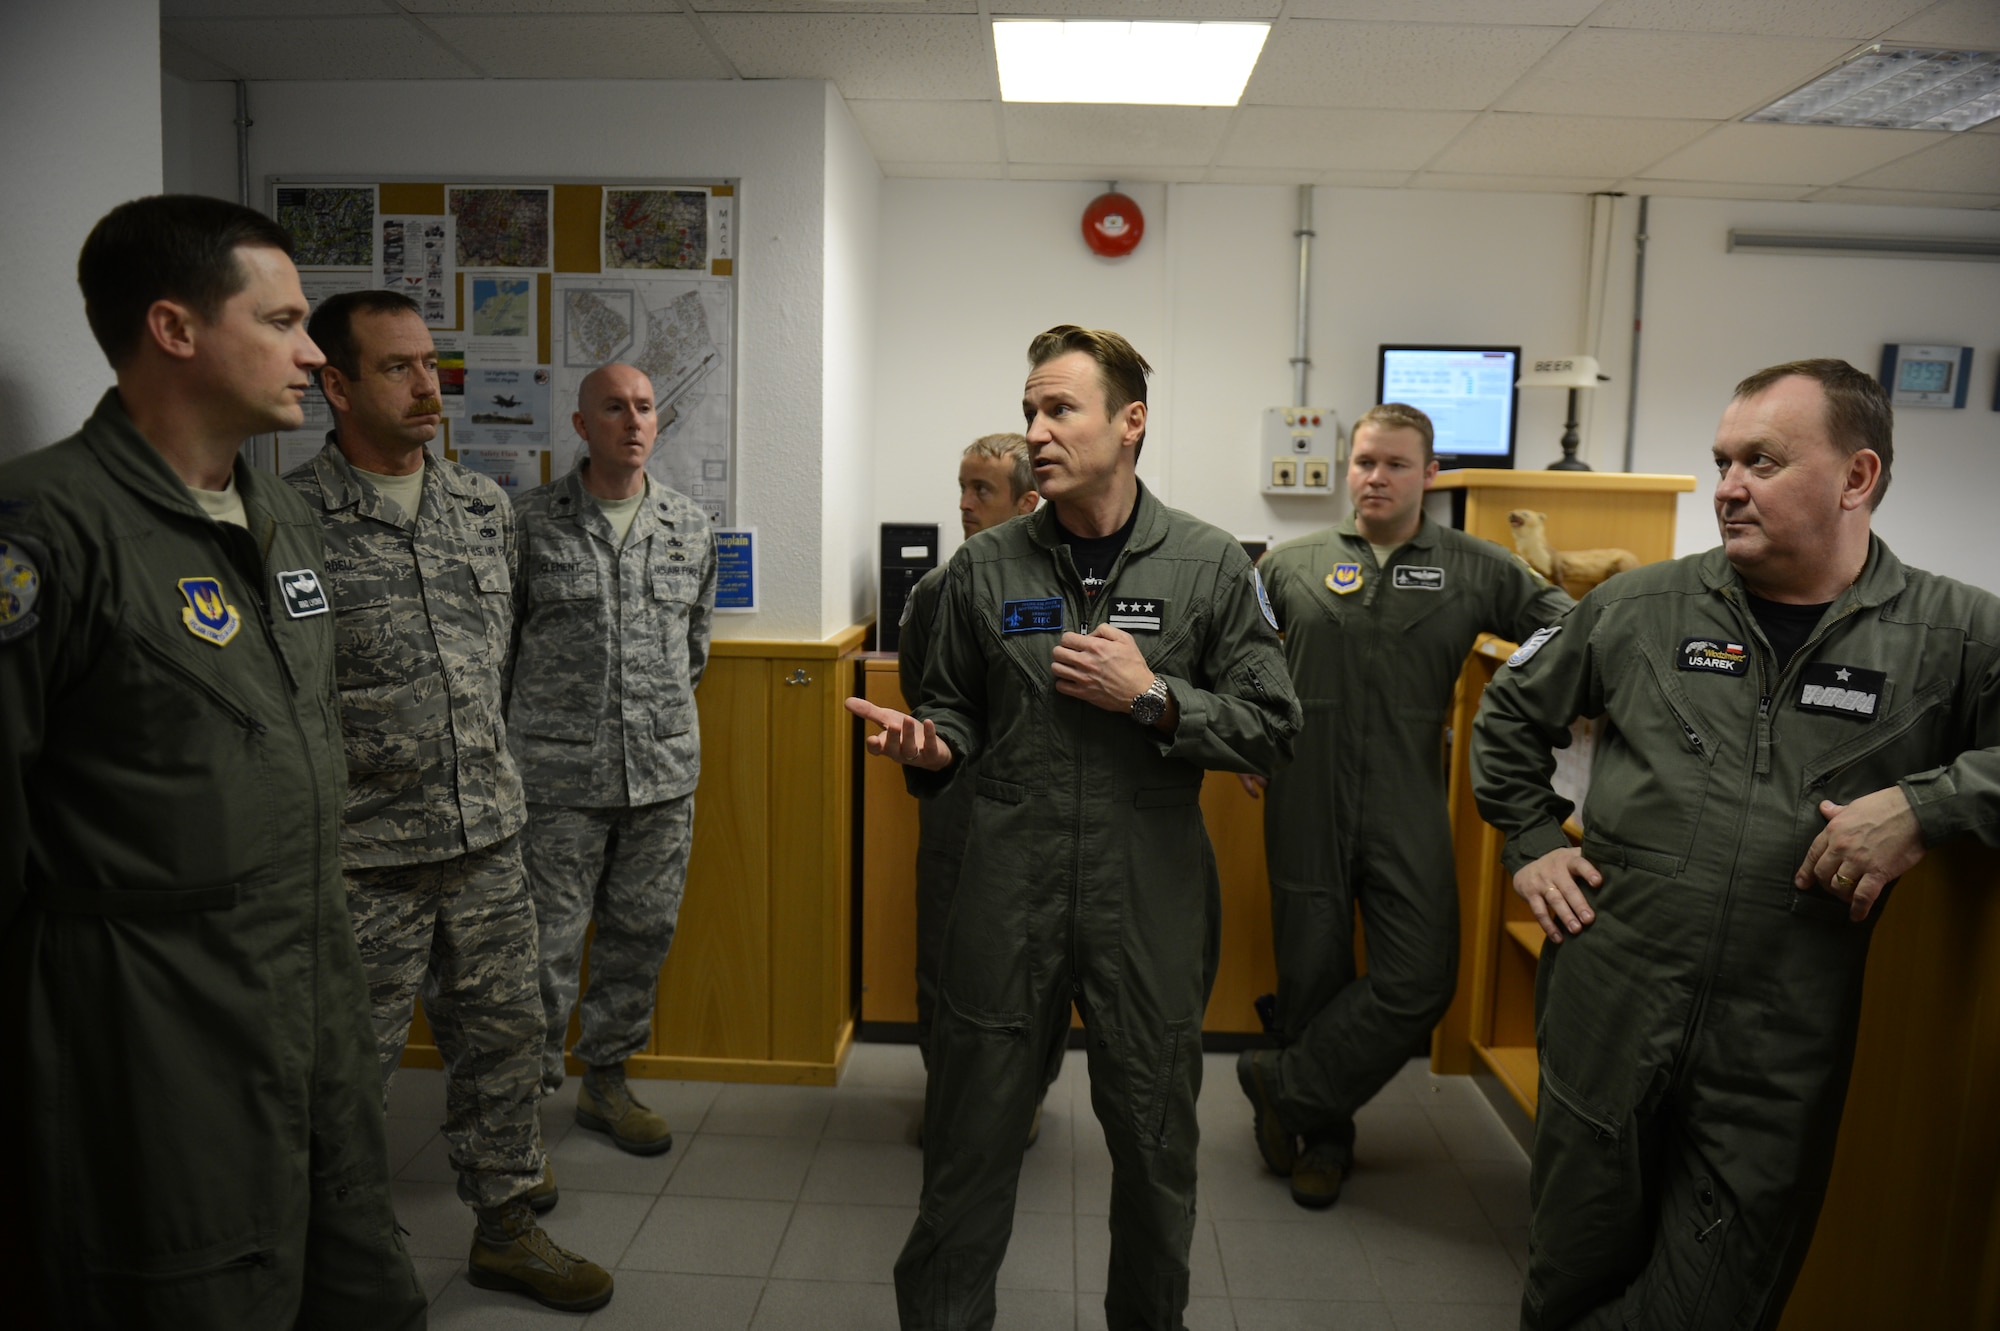 SPANGDAHLEM AIR BASE, Germany – Polish air force Col. Kristian Ziec, 32nd Air Base commander, speaks to members of the 480th Fighter Squadron during a visit to Spangdahlem Air Base Nov. 26, 2012.  The tour was held to enhance both countries' mission effectiveness as NATO partners. (U.S. Air Force photo by Airman 1st Class Gustavo Castillo/Released)